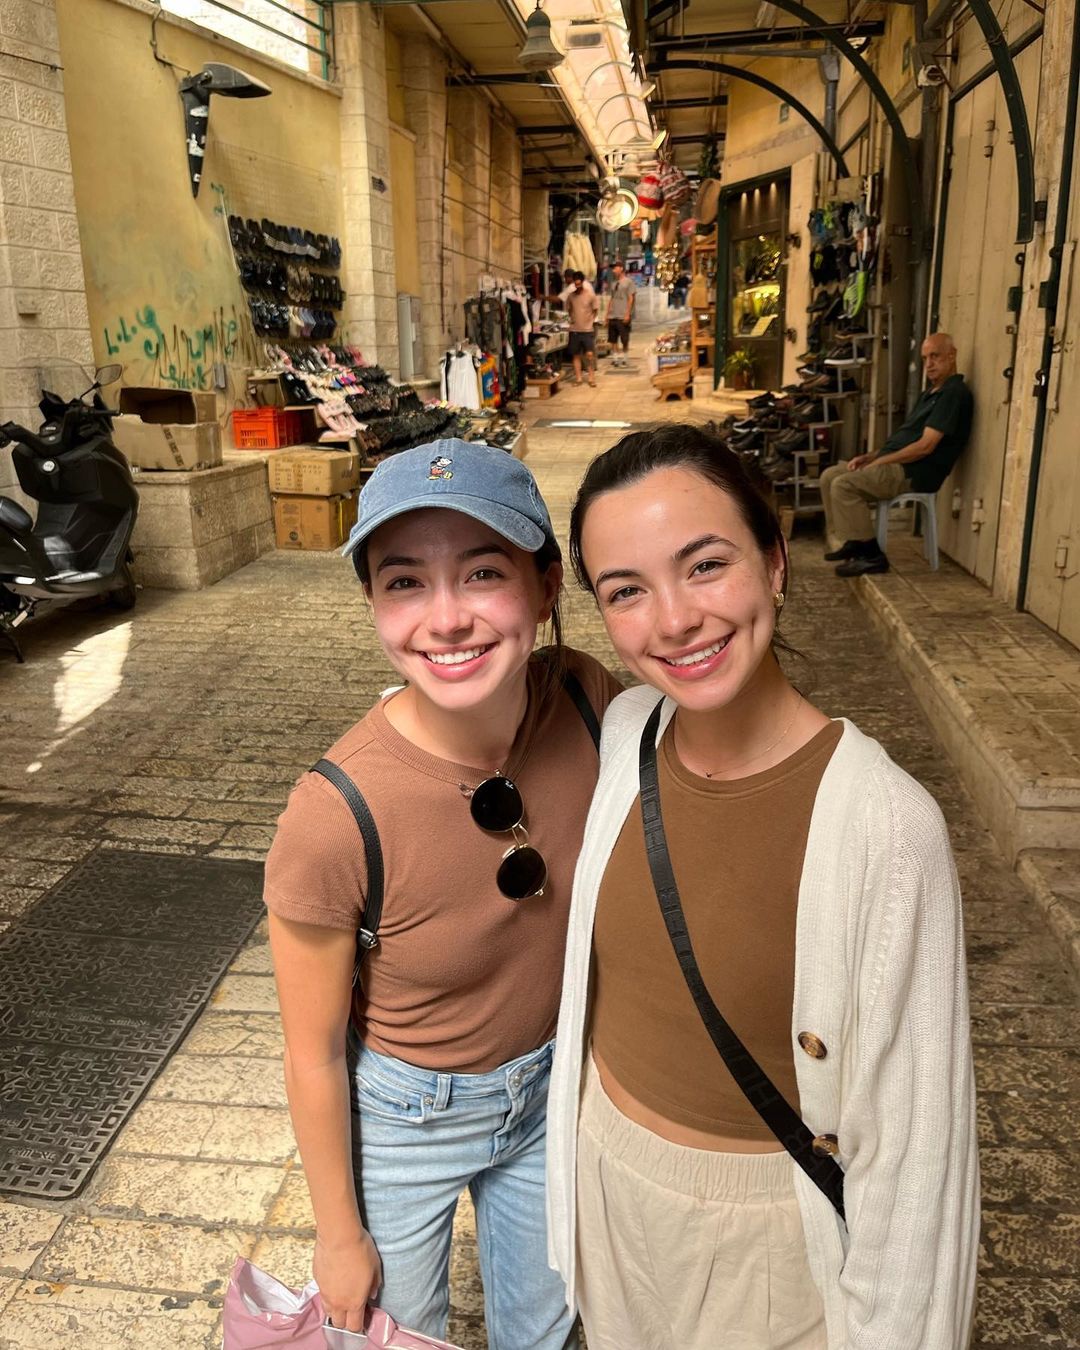 Merrell Twins Phone Numbers, Email and Residence Addresses